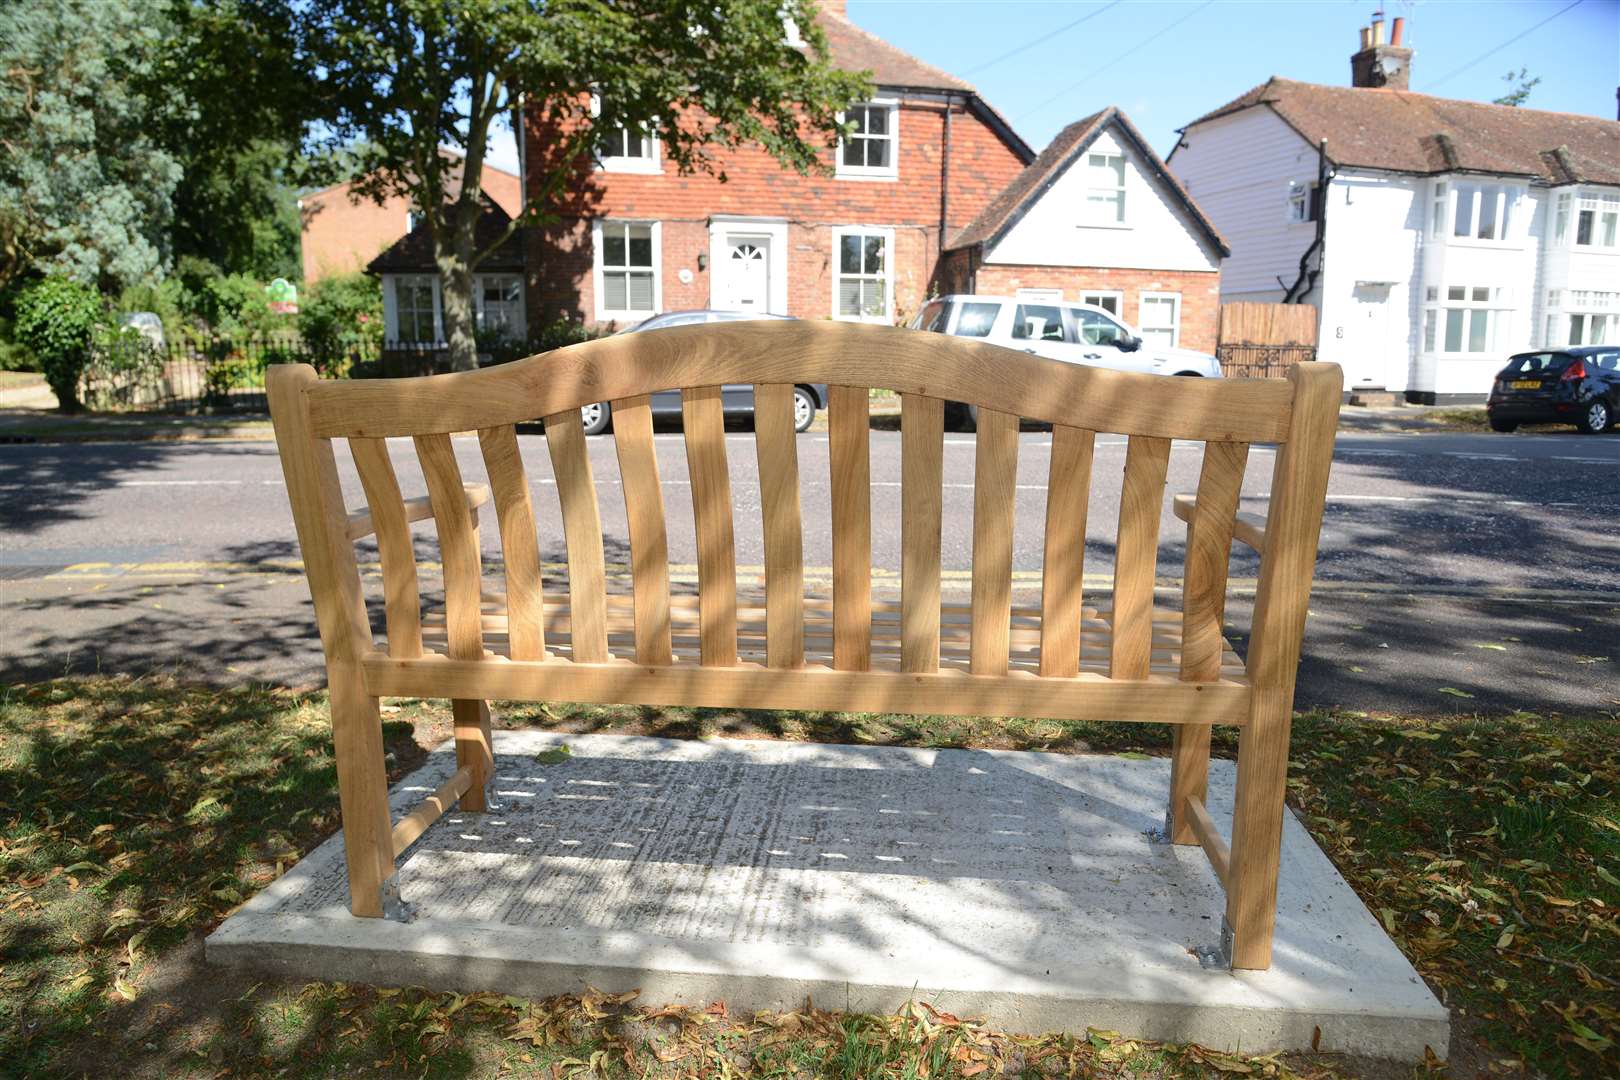 KCC has said it's impossible for the town council to install additional memorial benches like this one on Golden Square.